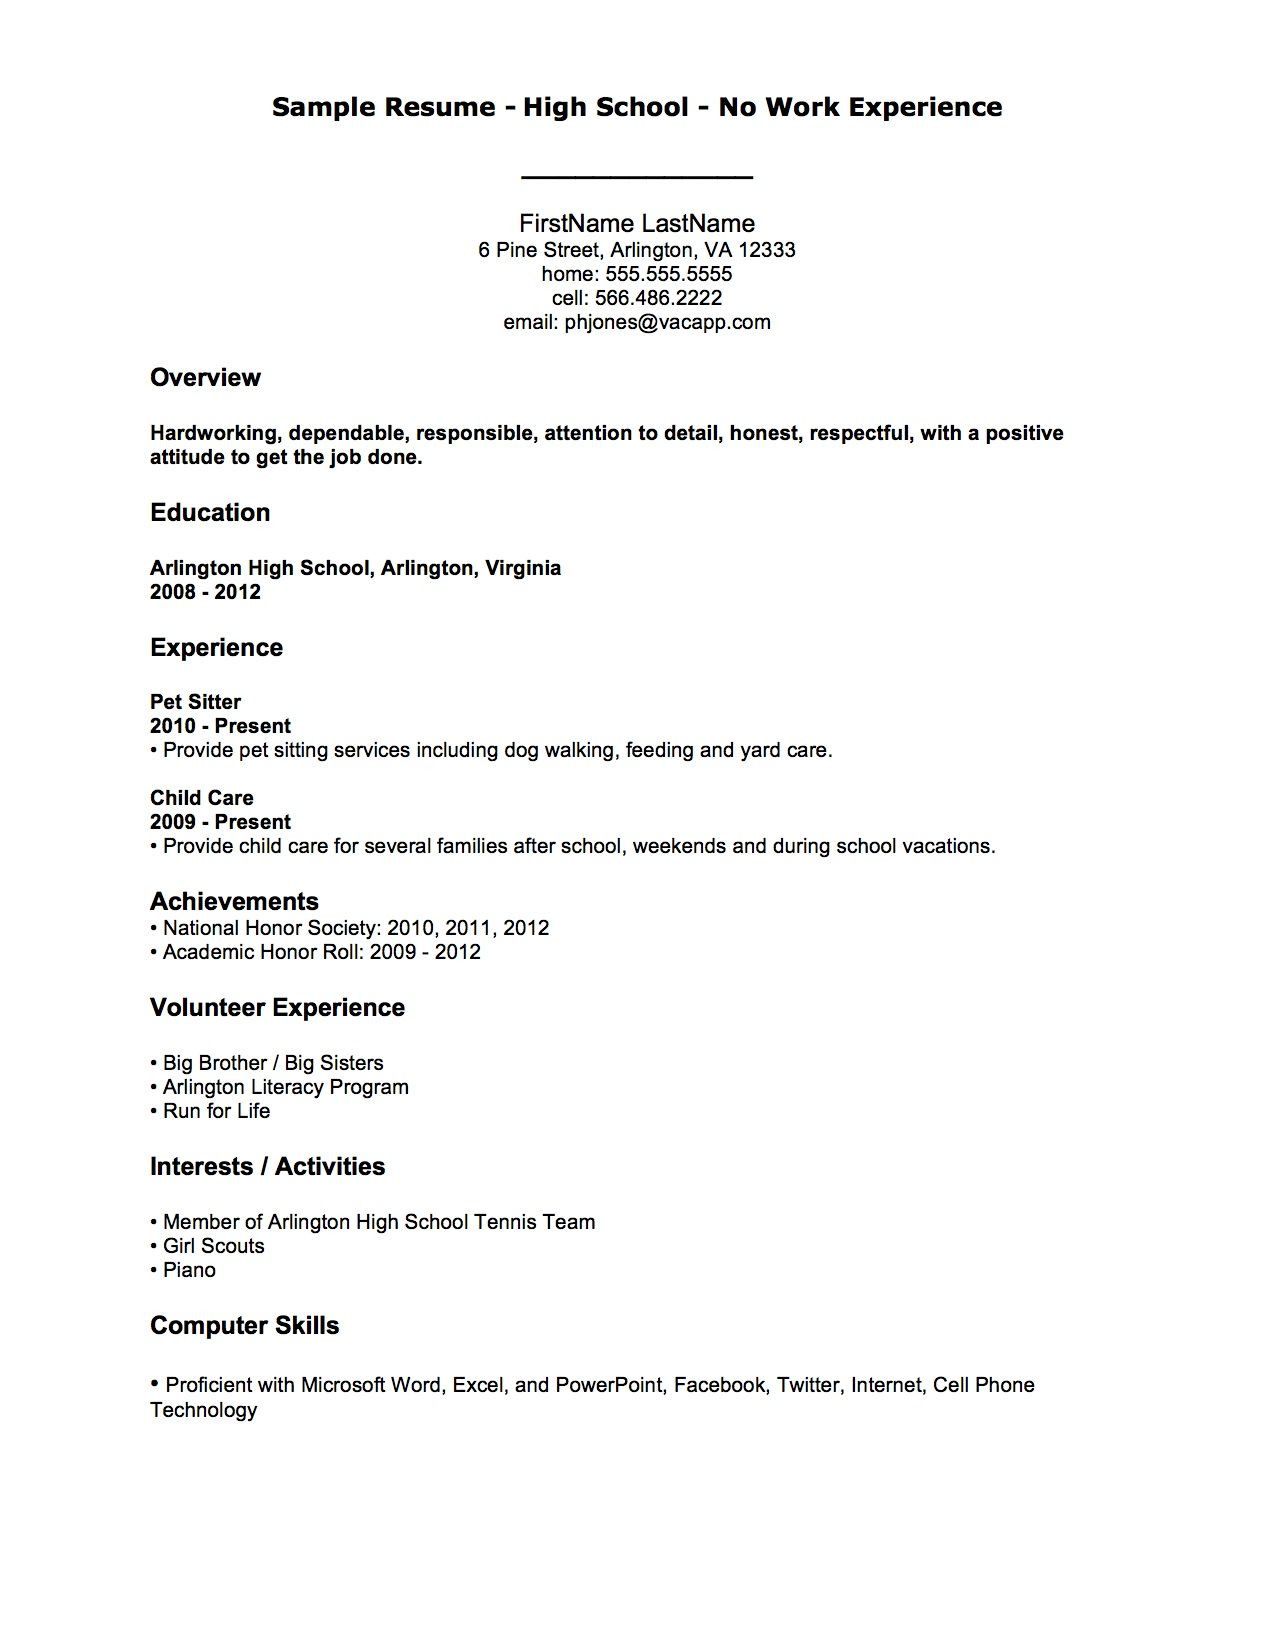 Resume Templates for Students with No Job Experience Resume Examples with No Job Experience , #examples #experience …